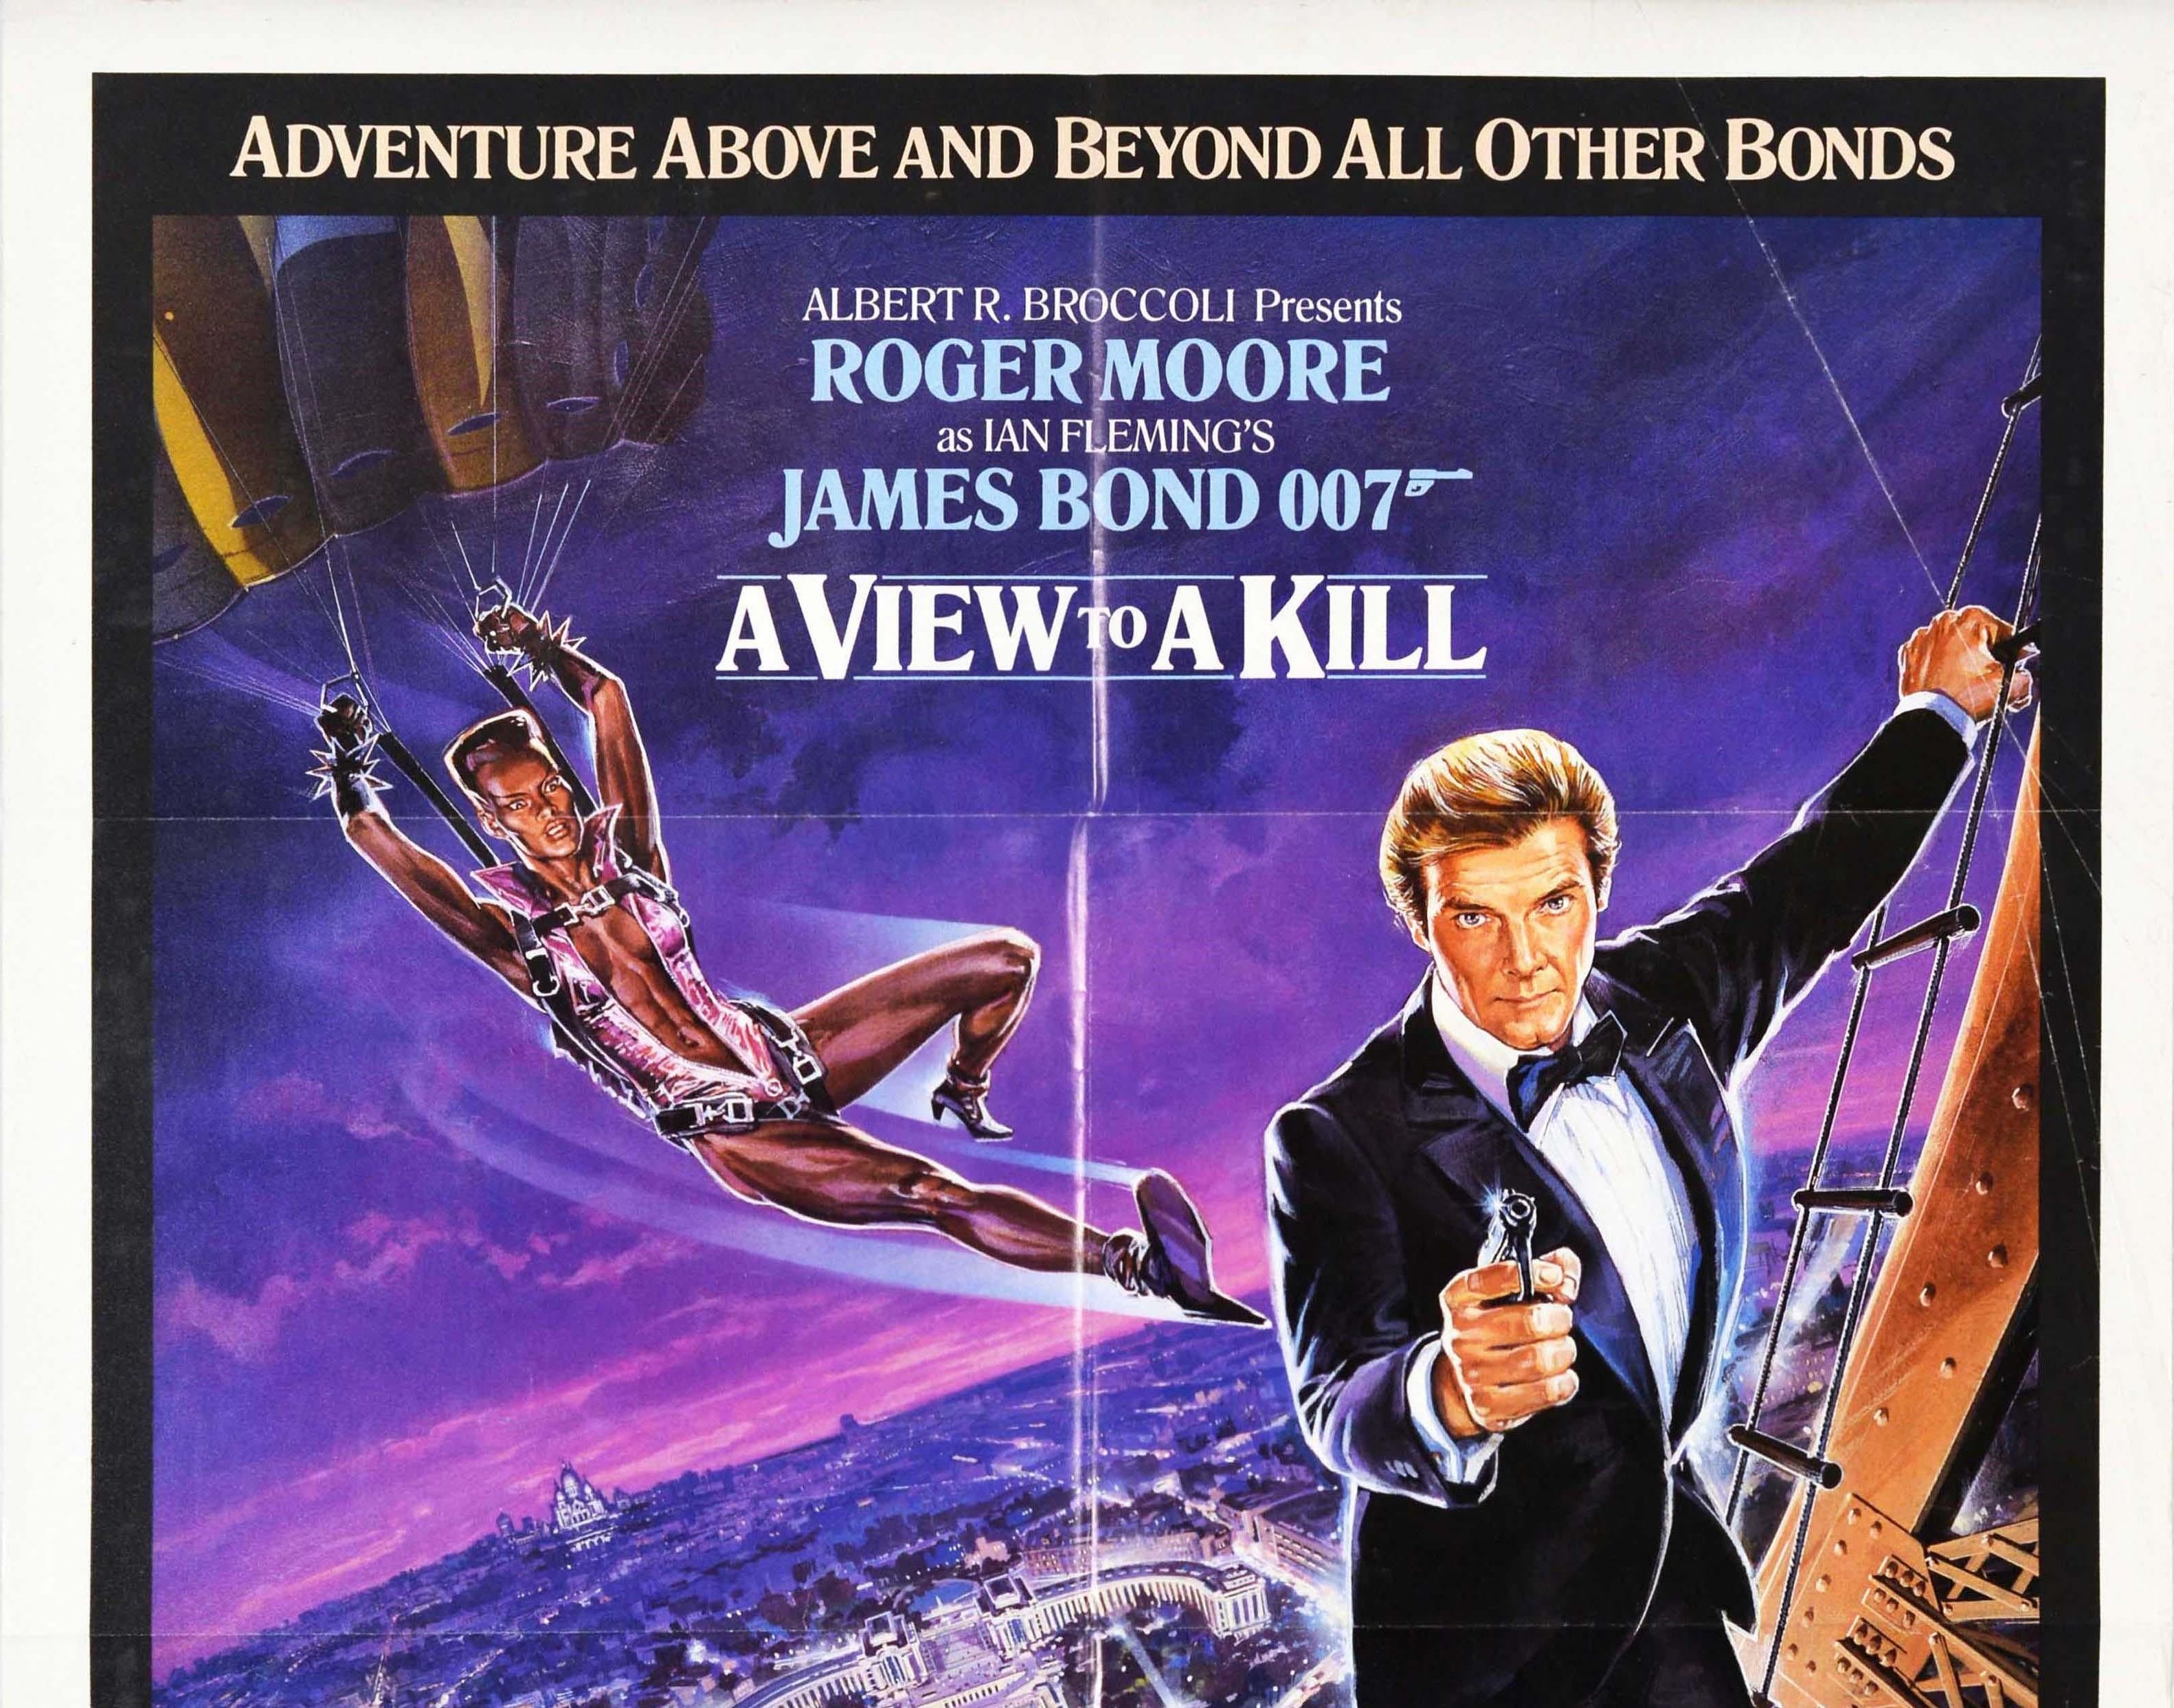 Original vintage teaser movie poster for the James Bond 007 film A View To A Kill - Adventure Above And Beyond All Other Bonds Coming This Summer - released in 1985 and directed by John Glen starring Roger Moore as the British spy James Bond with